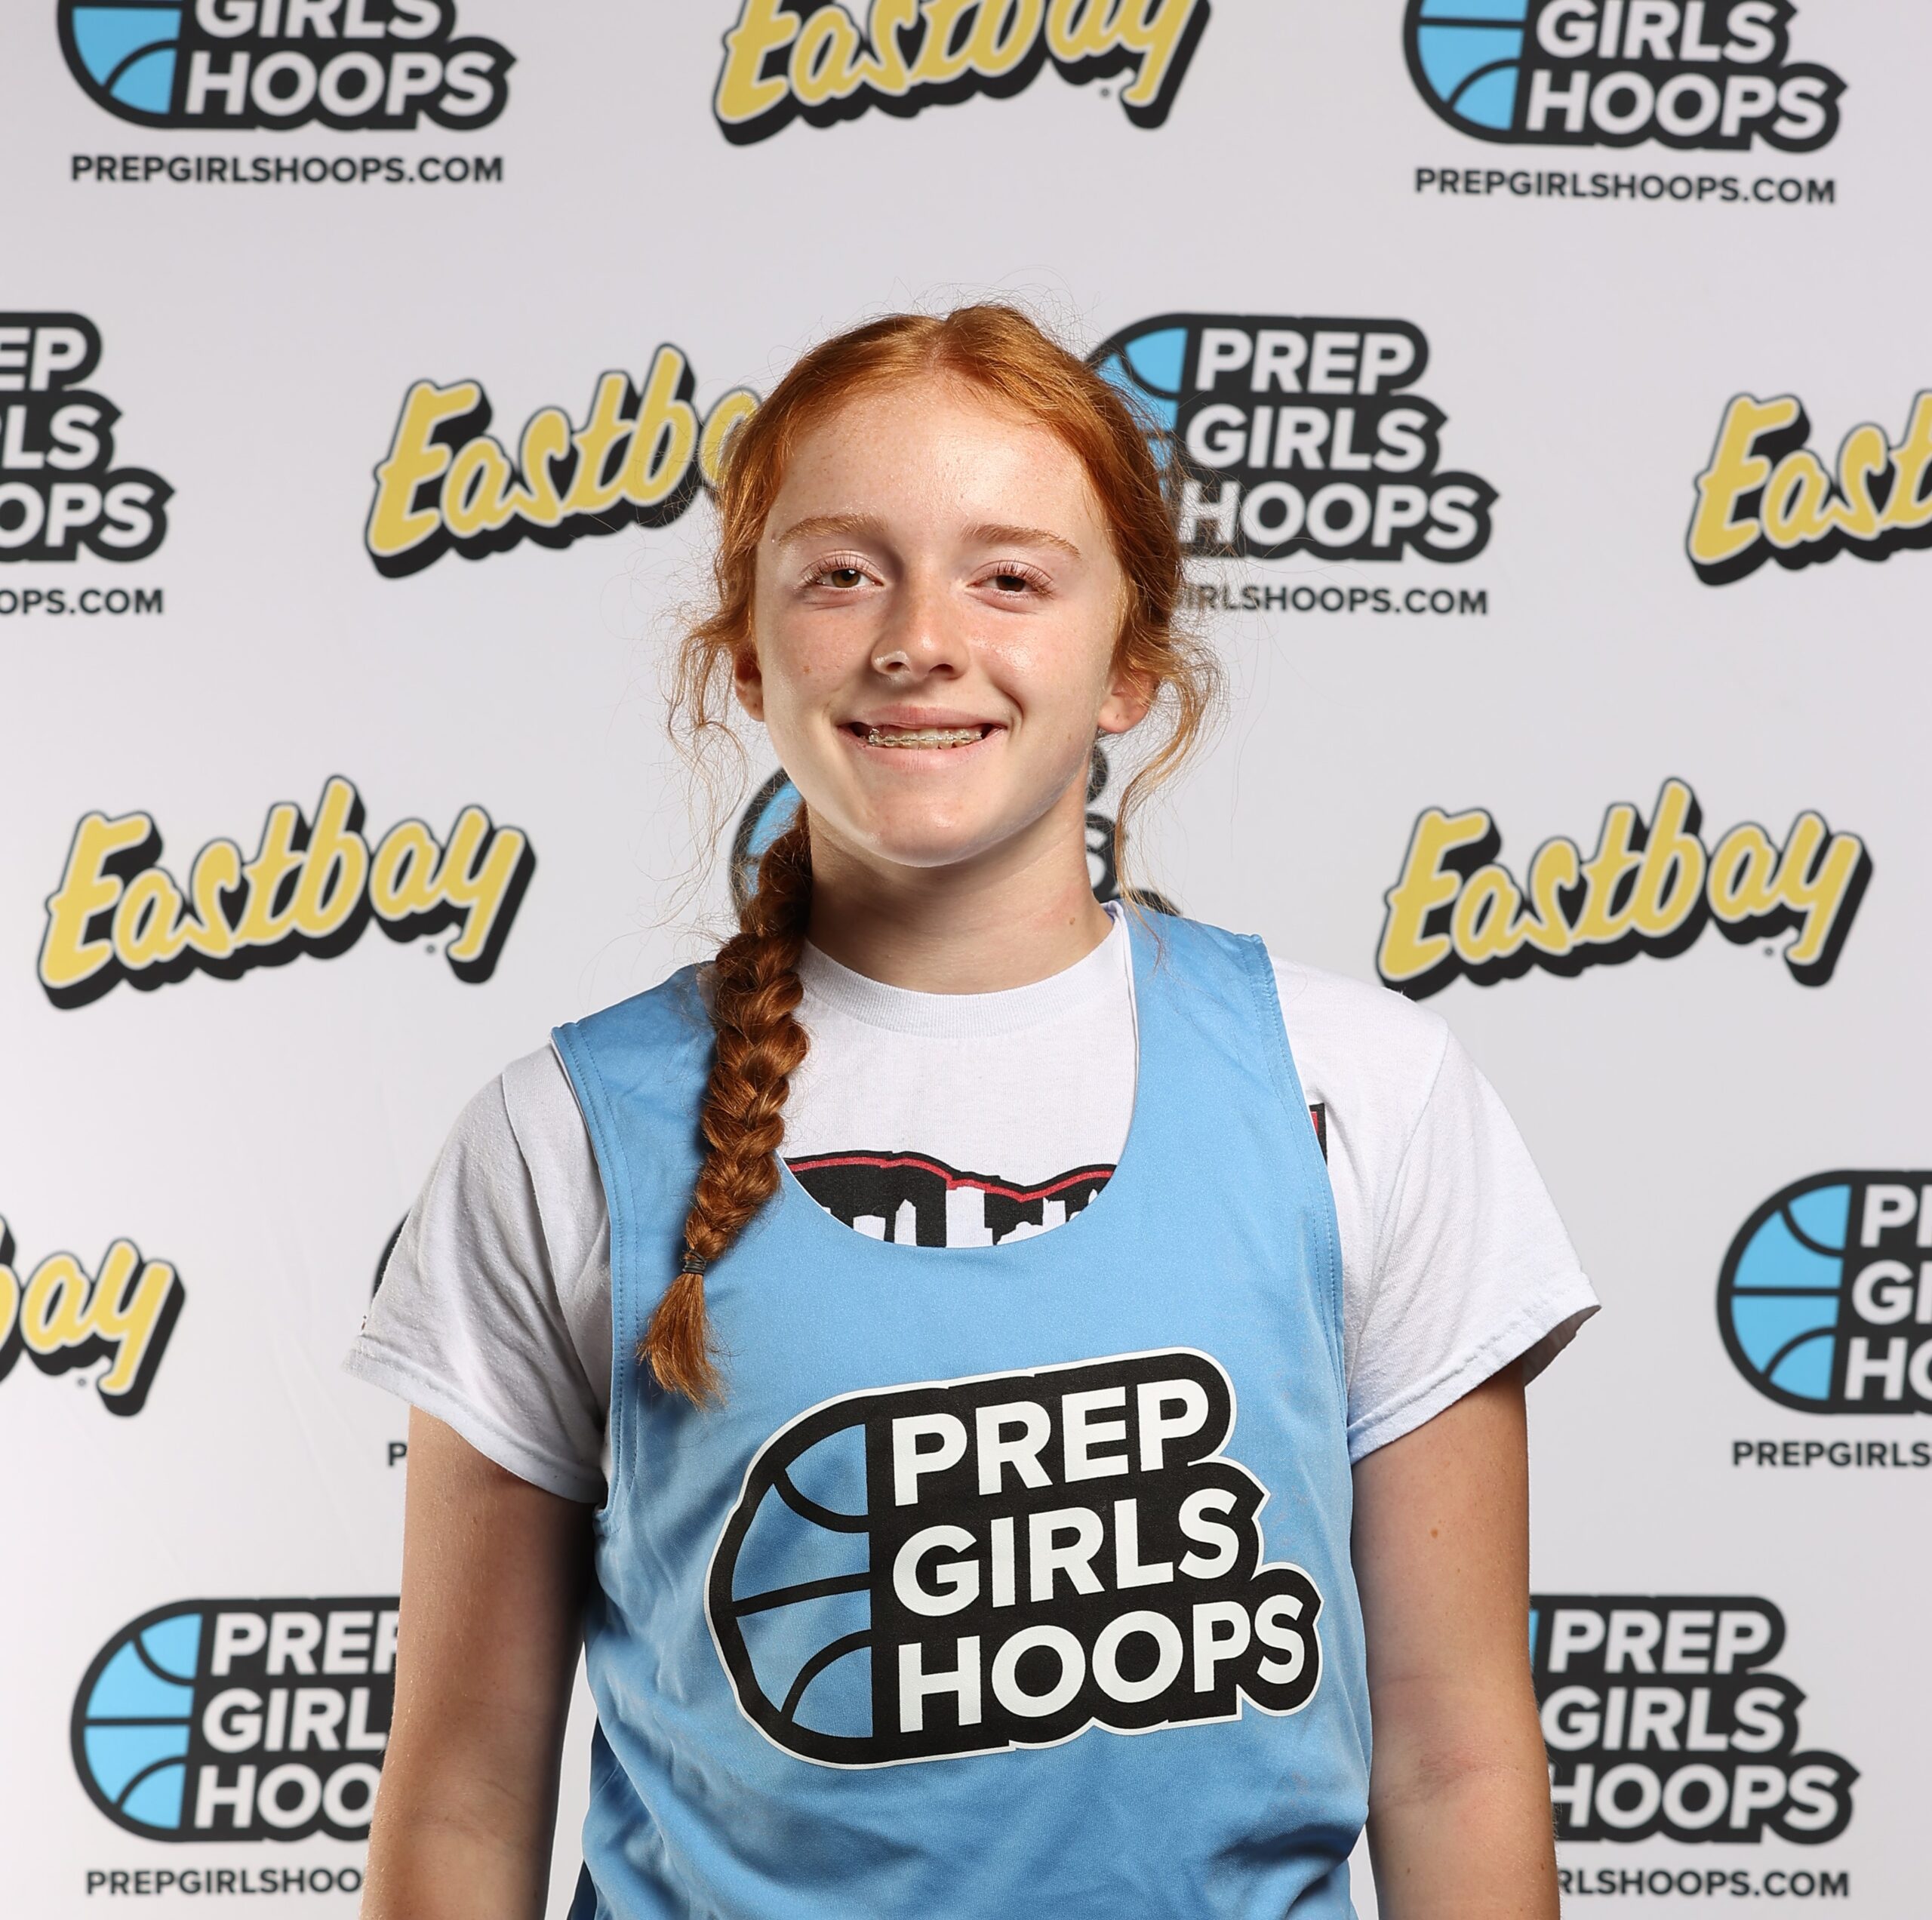 <span class="pn-tooltip pn-player-link">
        <span class="name-pointer">PGH Ohio Freshman Showcase- Part 4</span>
        <span class="info-box not-prose" style="background: linear-gradient(to bottom, rgba(1,183,255, 0.95) 0%,rgba(1,183,255, 1) 100%)">
            <a href="https://prepgirlshoops.com/2022/08/pgh-ohio-freshman-showcase-part-4/" class="link-wrap">
                                    <span class="player-img"><img src="https://prepgirlshoops.com/wp-content/uploads/sites/4/2022/08/Magnolia-Holbert-scaled.jpg?w=150&h=150&crop=1" alt="PGH Ohio Freshman Showcase- Part 4"></span>
                
                <span class="player-details">
                    <span class="first-name">PGH</span>
                    <span class="last-name">Ohio Freshman Showcase- Part 4</span>
                    <span class="measurables">
                                            </span>
                                    </span>
                <span class="player-rank">
                                                        </span>
                                    <span class="state-abbr"></span>
                            </a>

            
        </span>
    </span>
